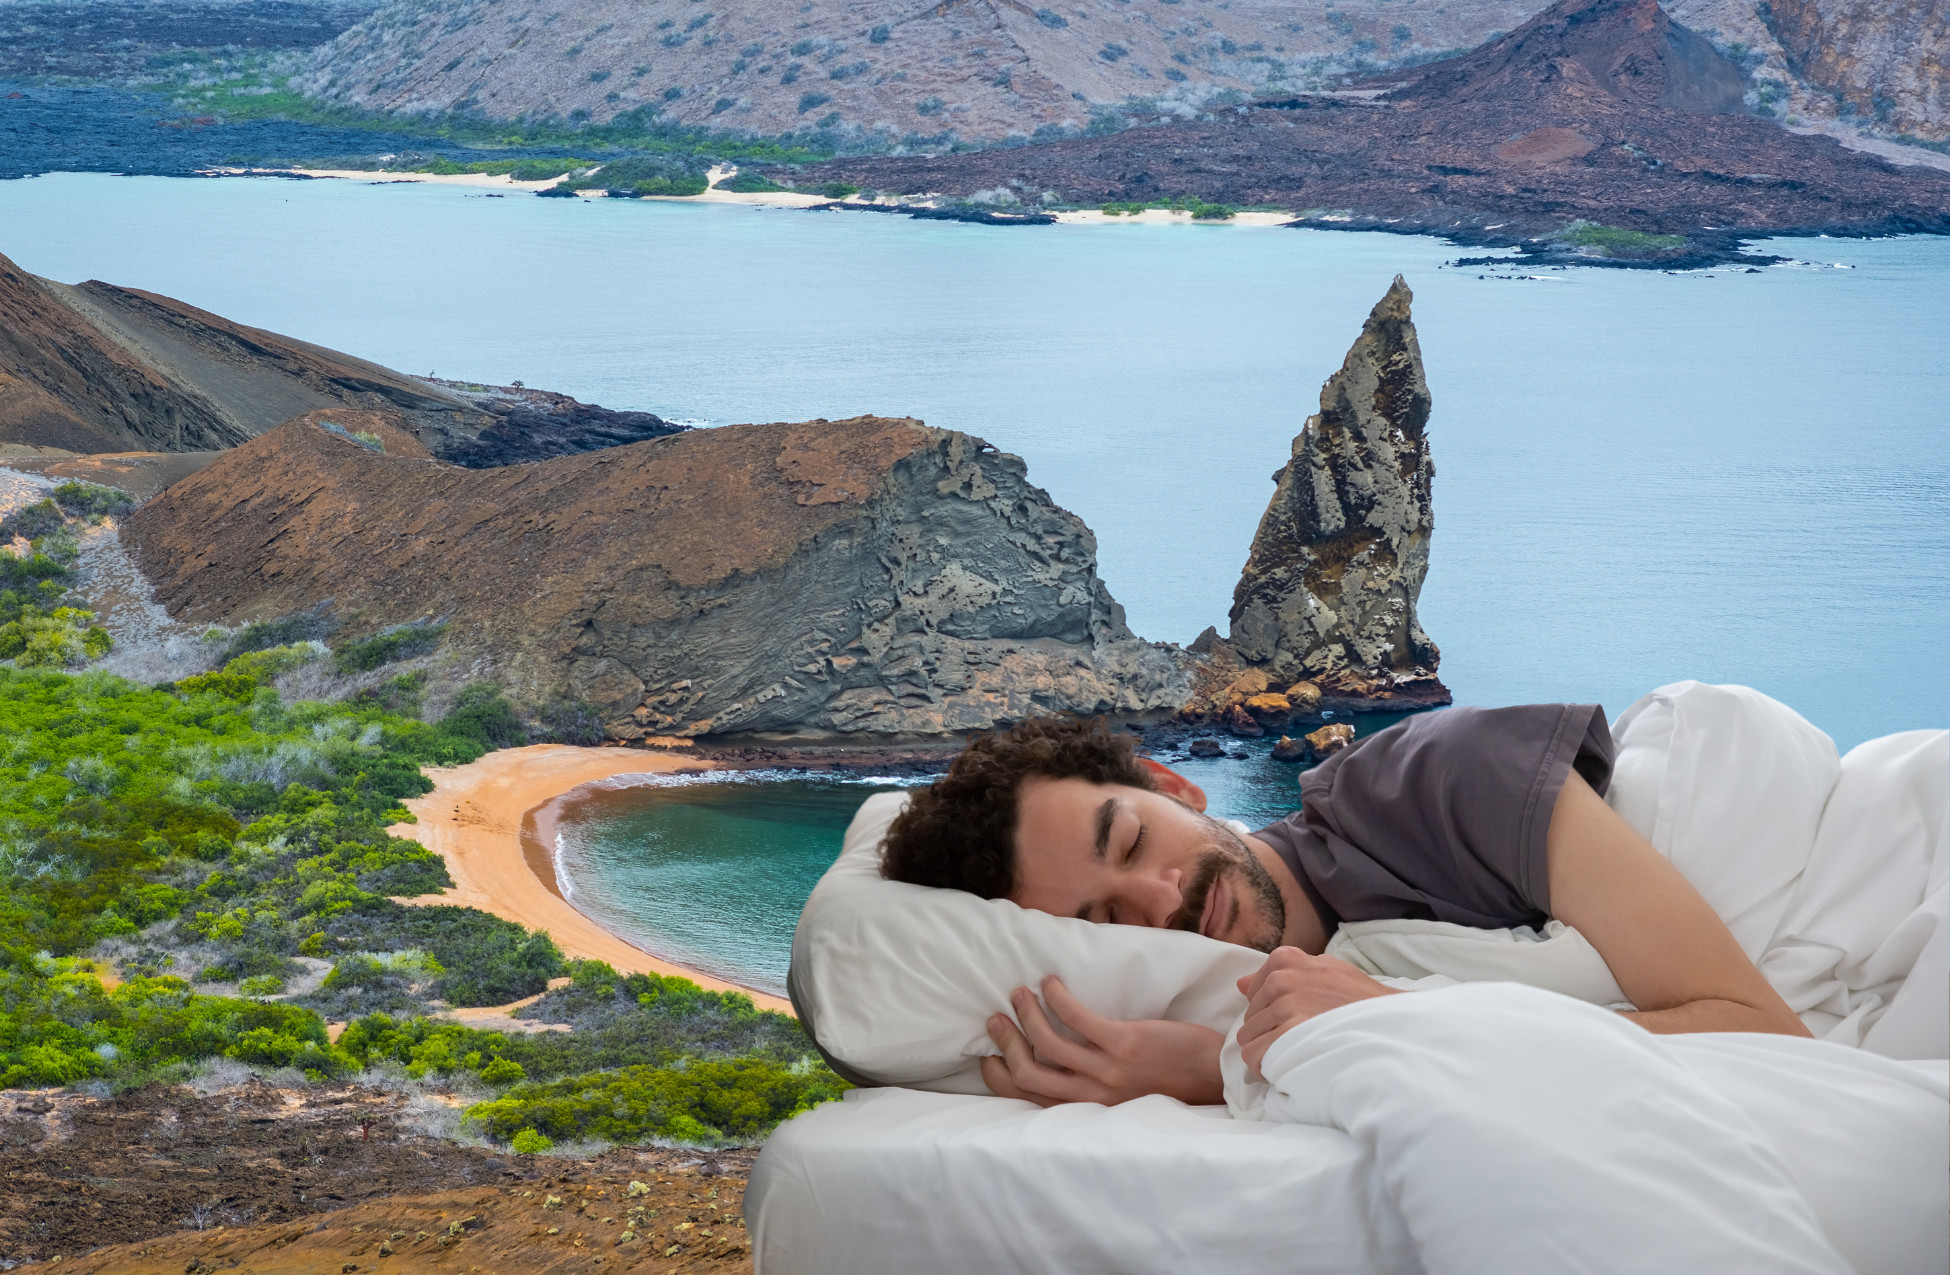 Best Hotels In The Galapagos Islands: Top 5 Breathtaking Stays!